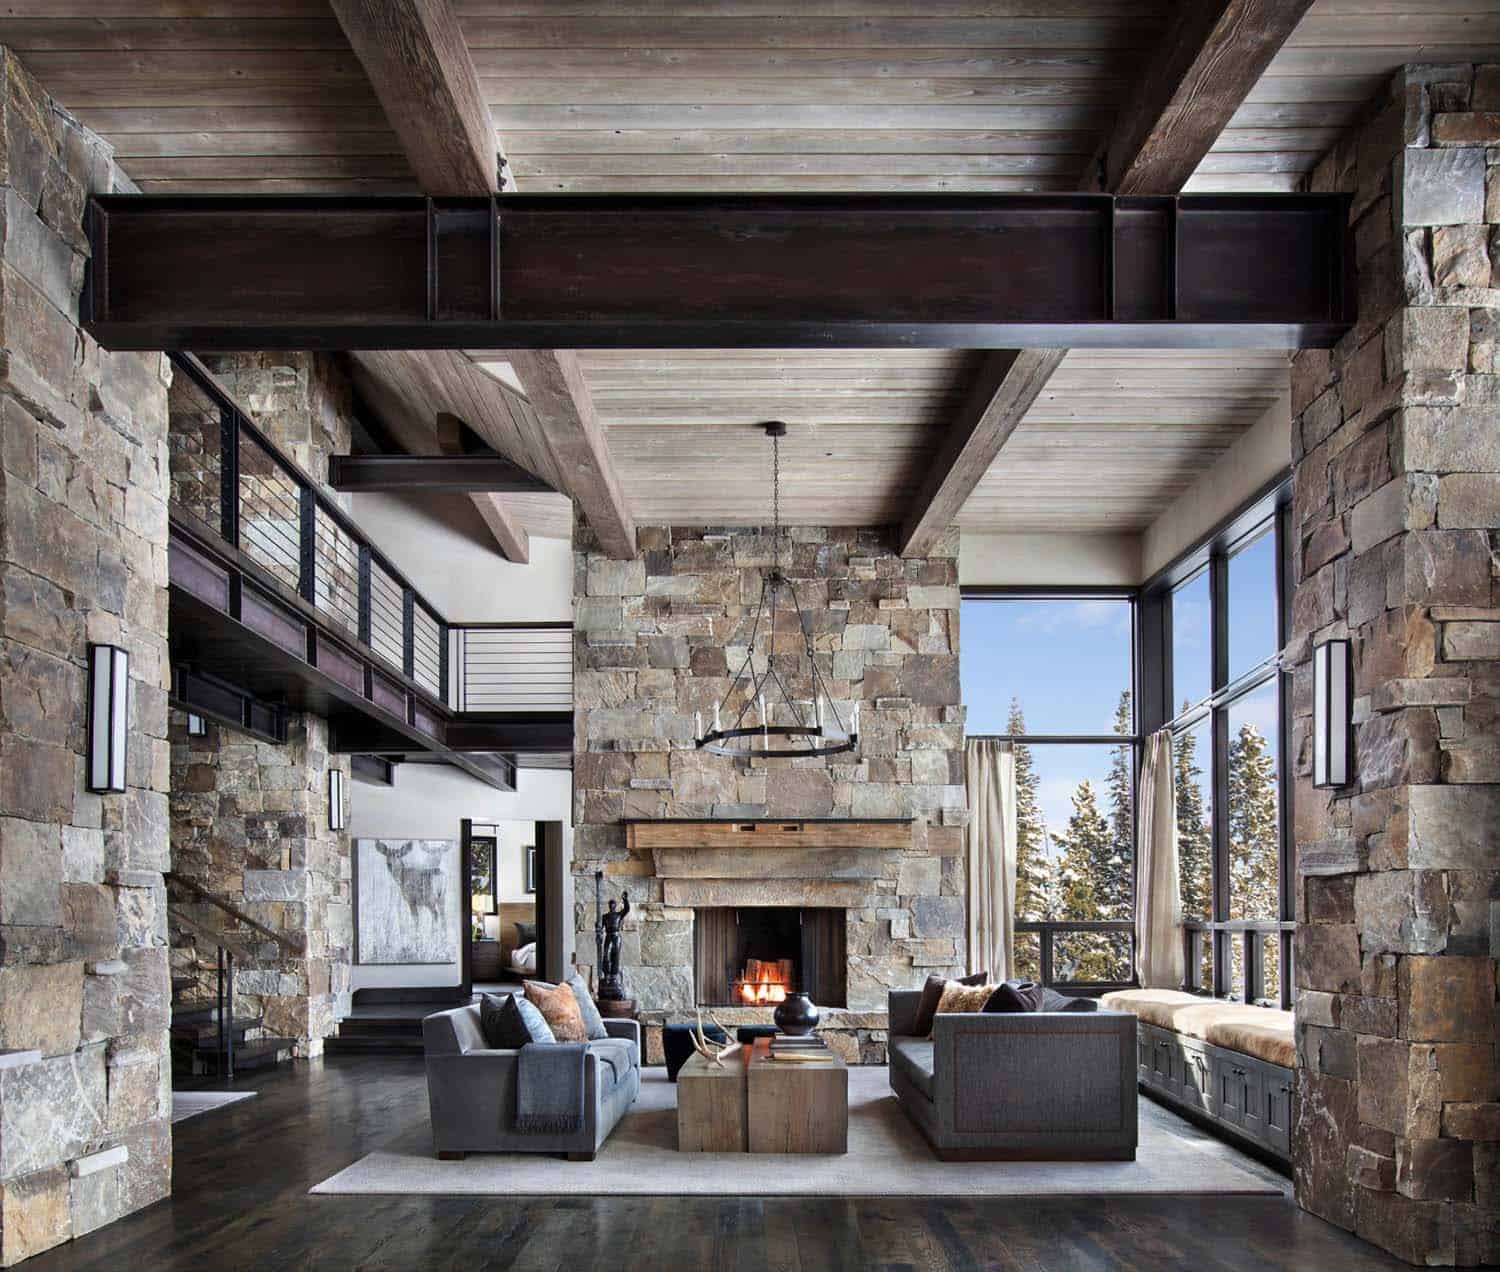 Incredible mountain modern dwelling offers slope-side ...